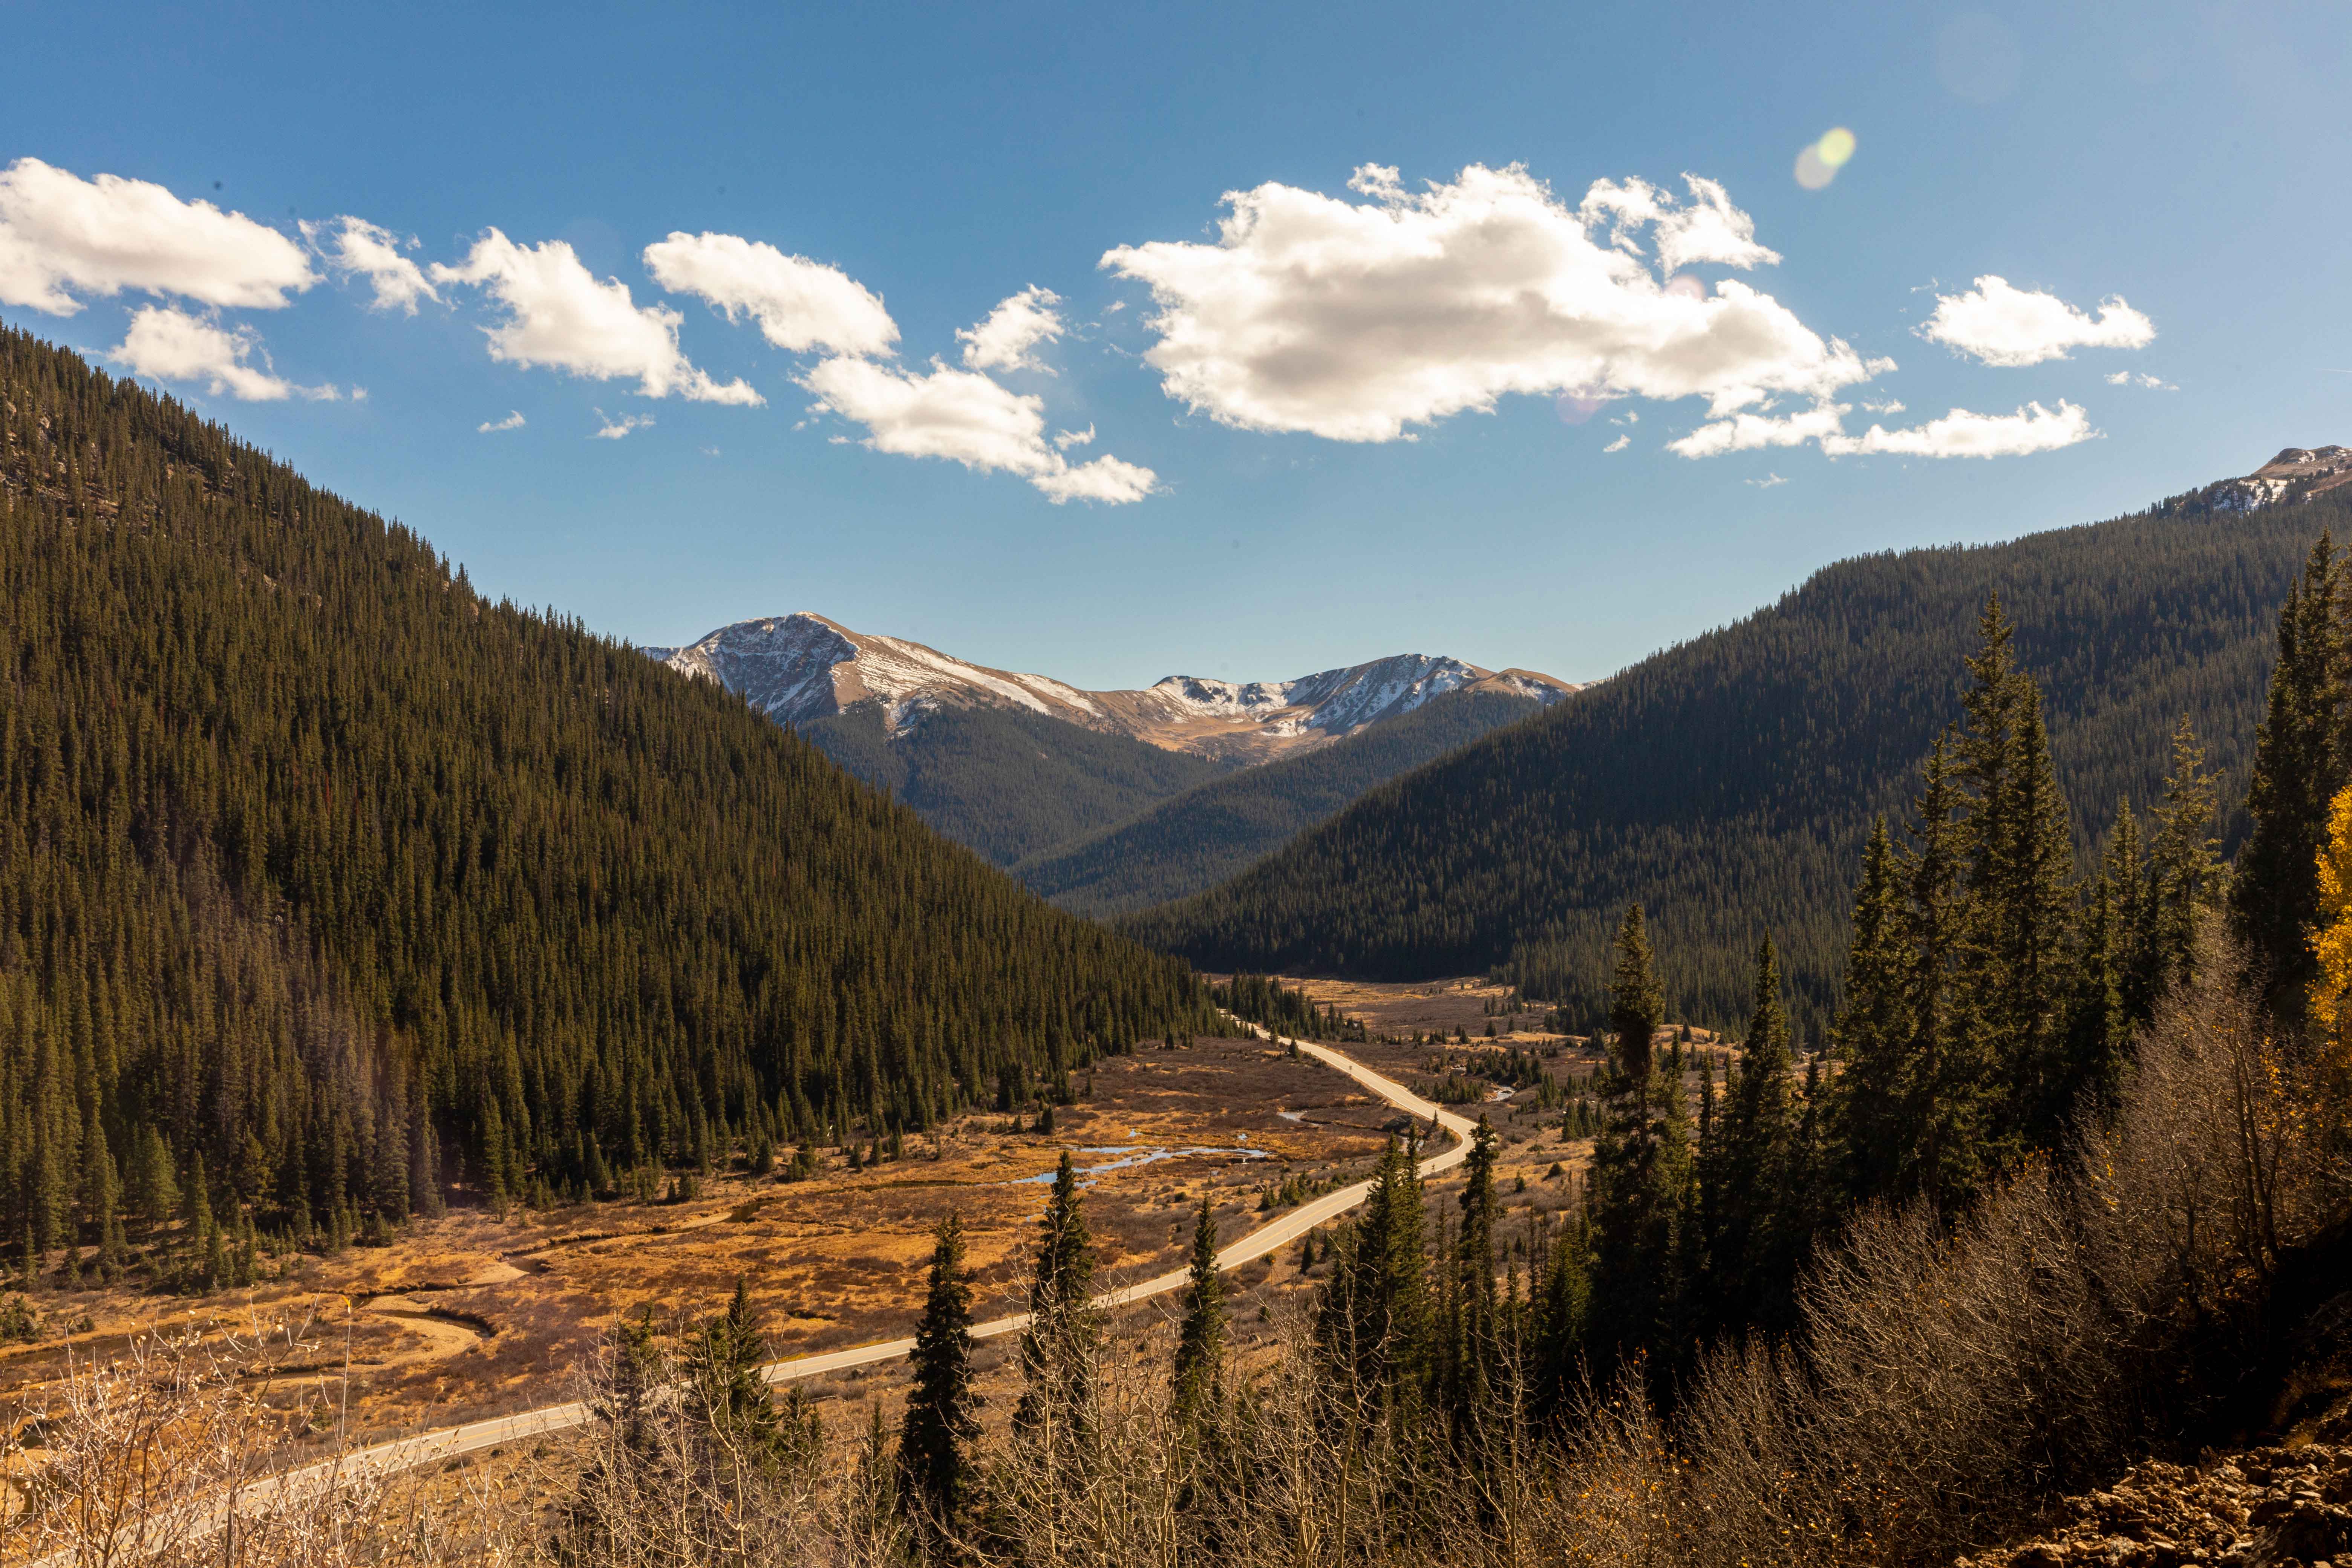 Landscape view of road near Colorado mountains